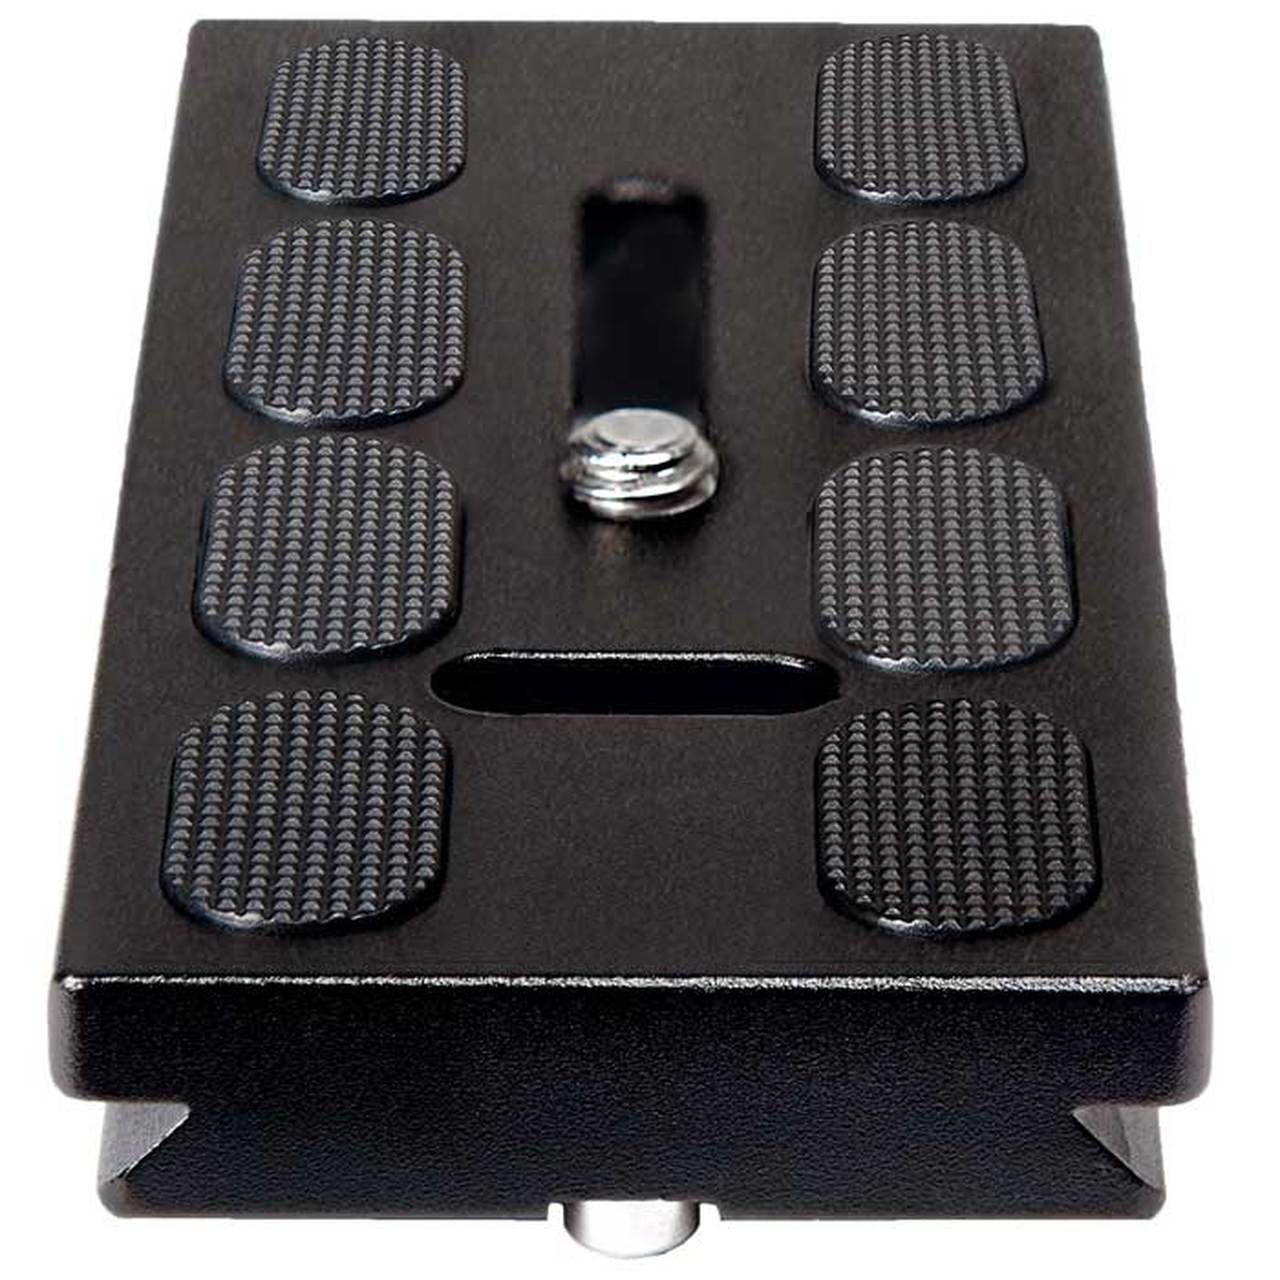 Promaster 7502 Quick Release Plate for GH25 Gimbal Head